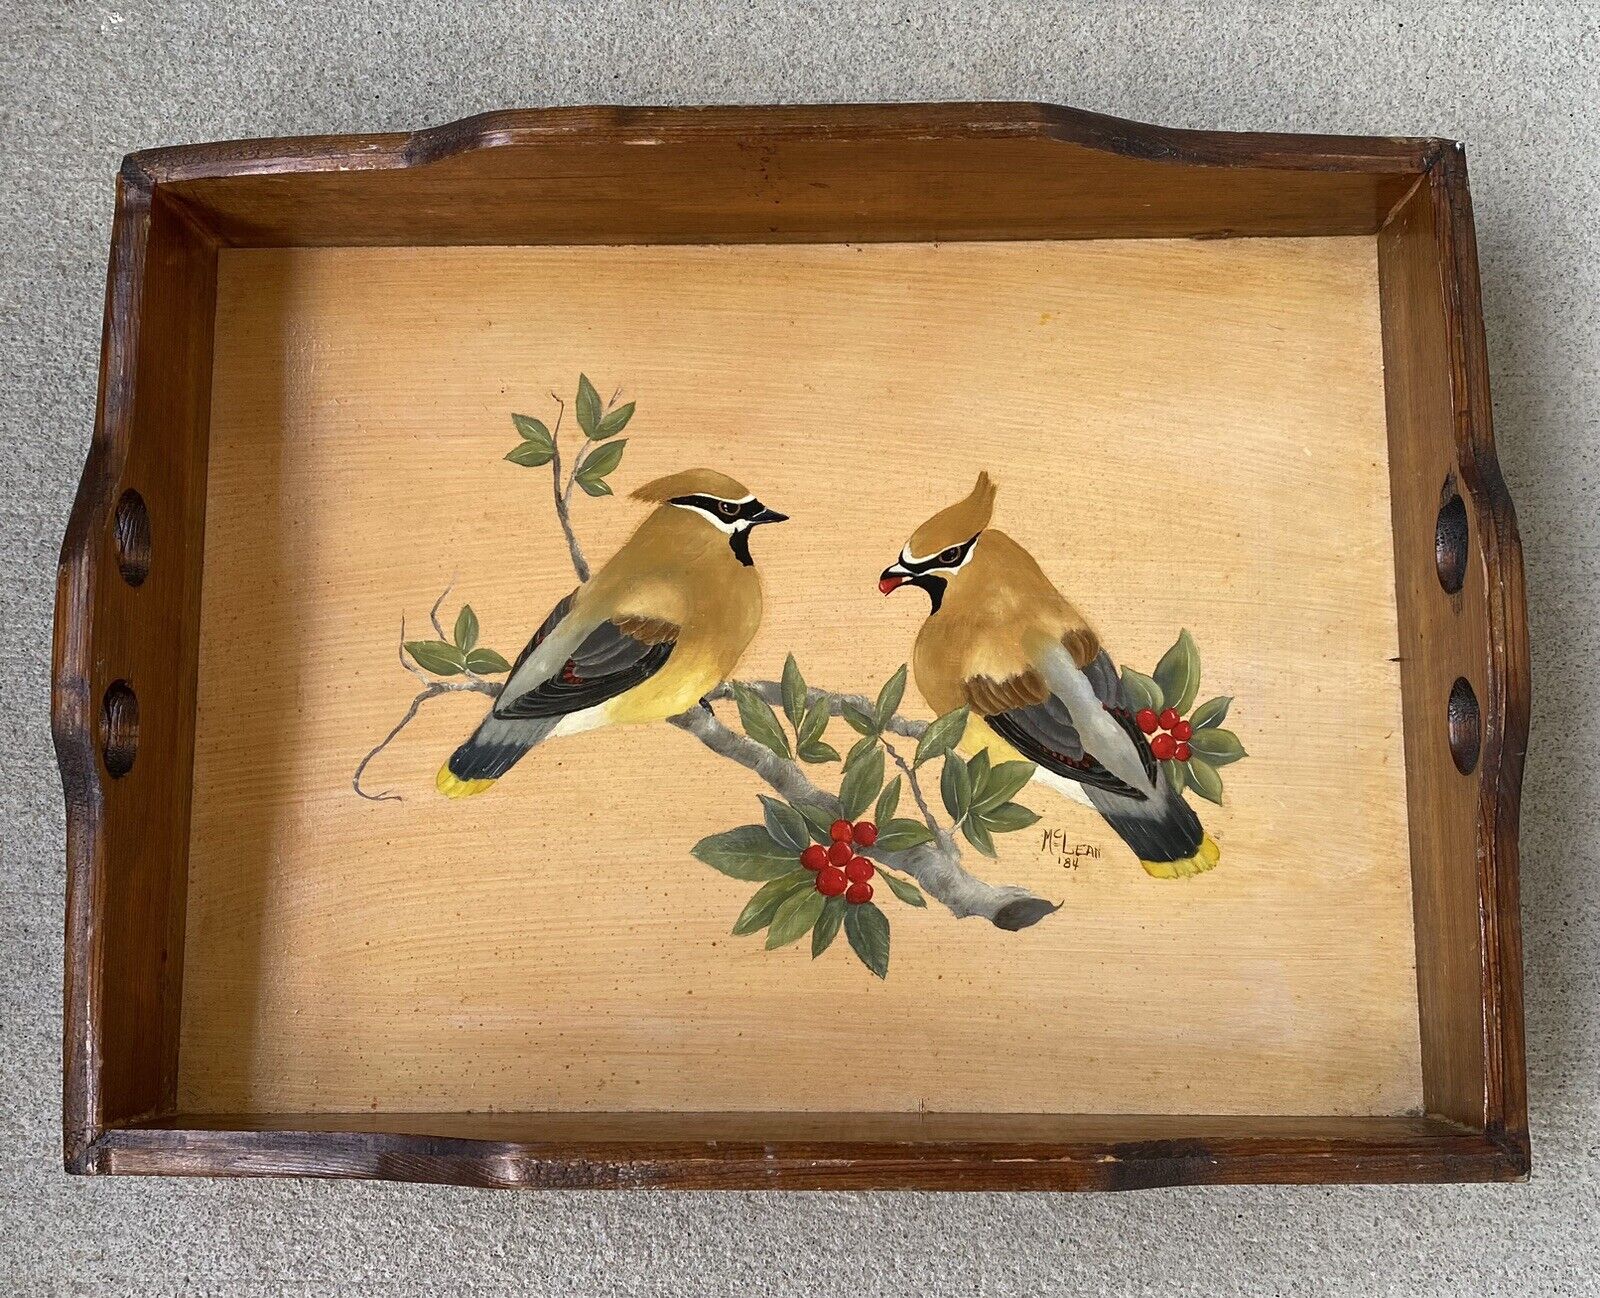 Vintage Hand Painted Bird Wooden Decorative Serving Tray 11.5x15.5x3in.